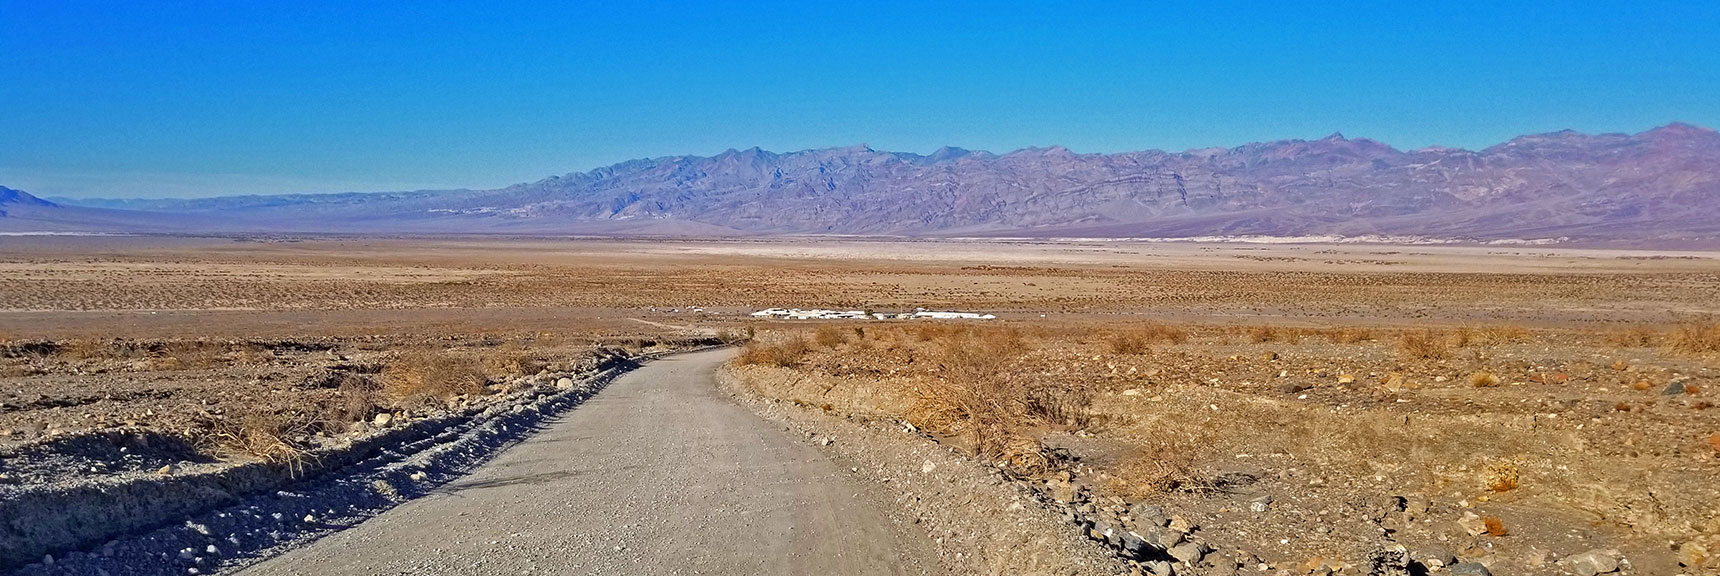 View of NE Death Valley from Mosaic Canyon Road | Mosaic Canyon, Above Stovepipe Wells, Death Valley National Park, California